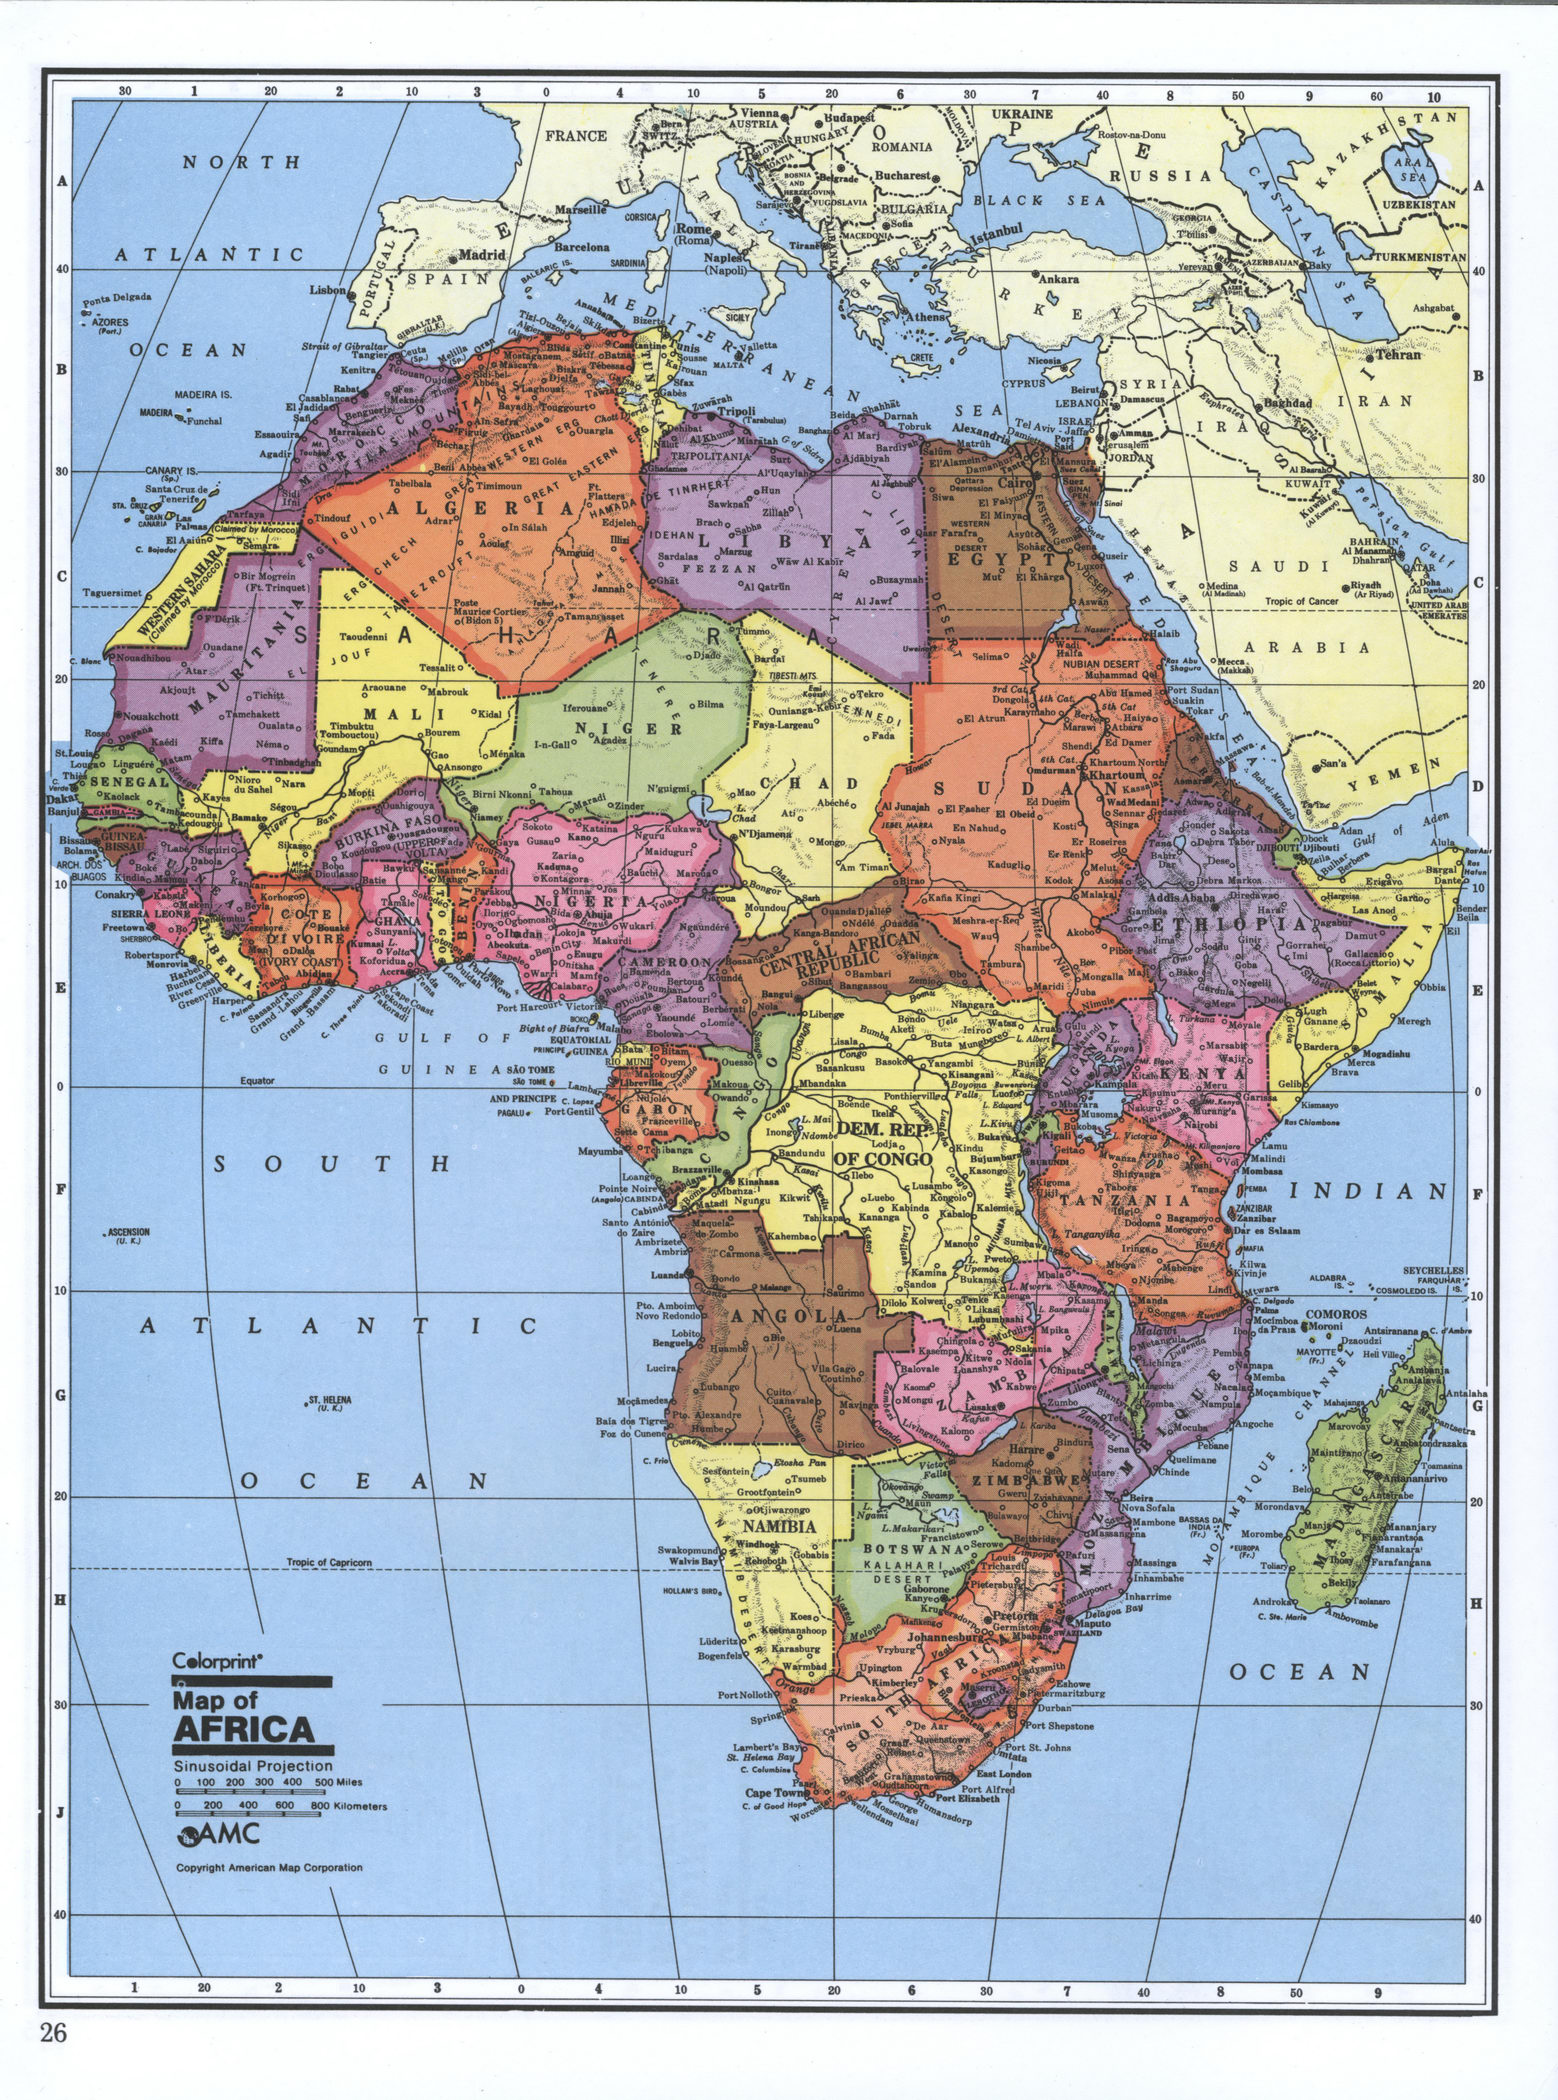 Maps Of Africa And African Countries Political Maps Road And Sexiz Pix 9321